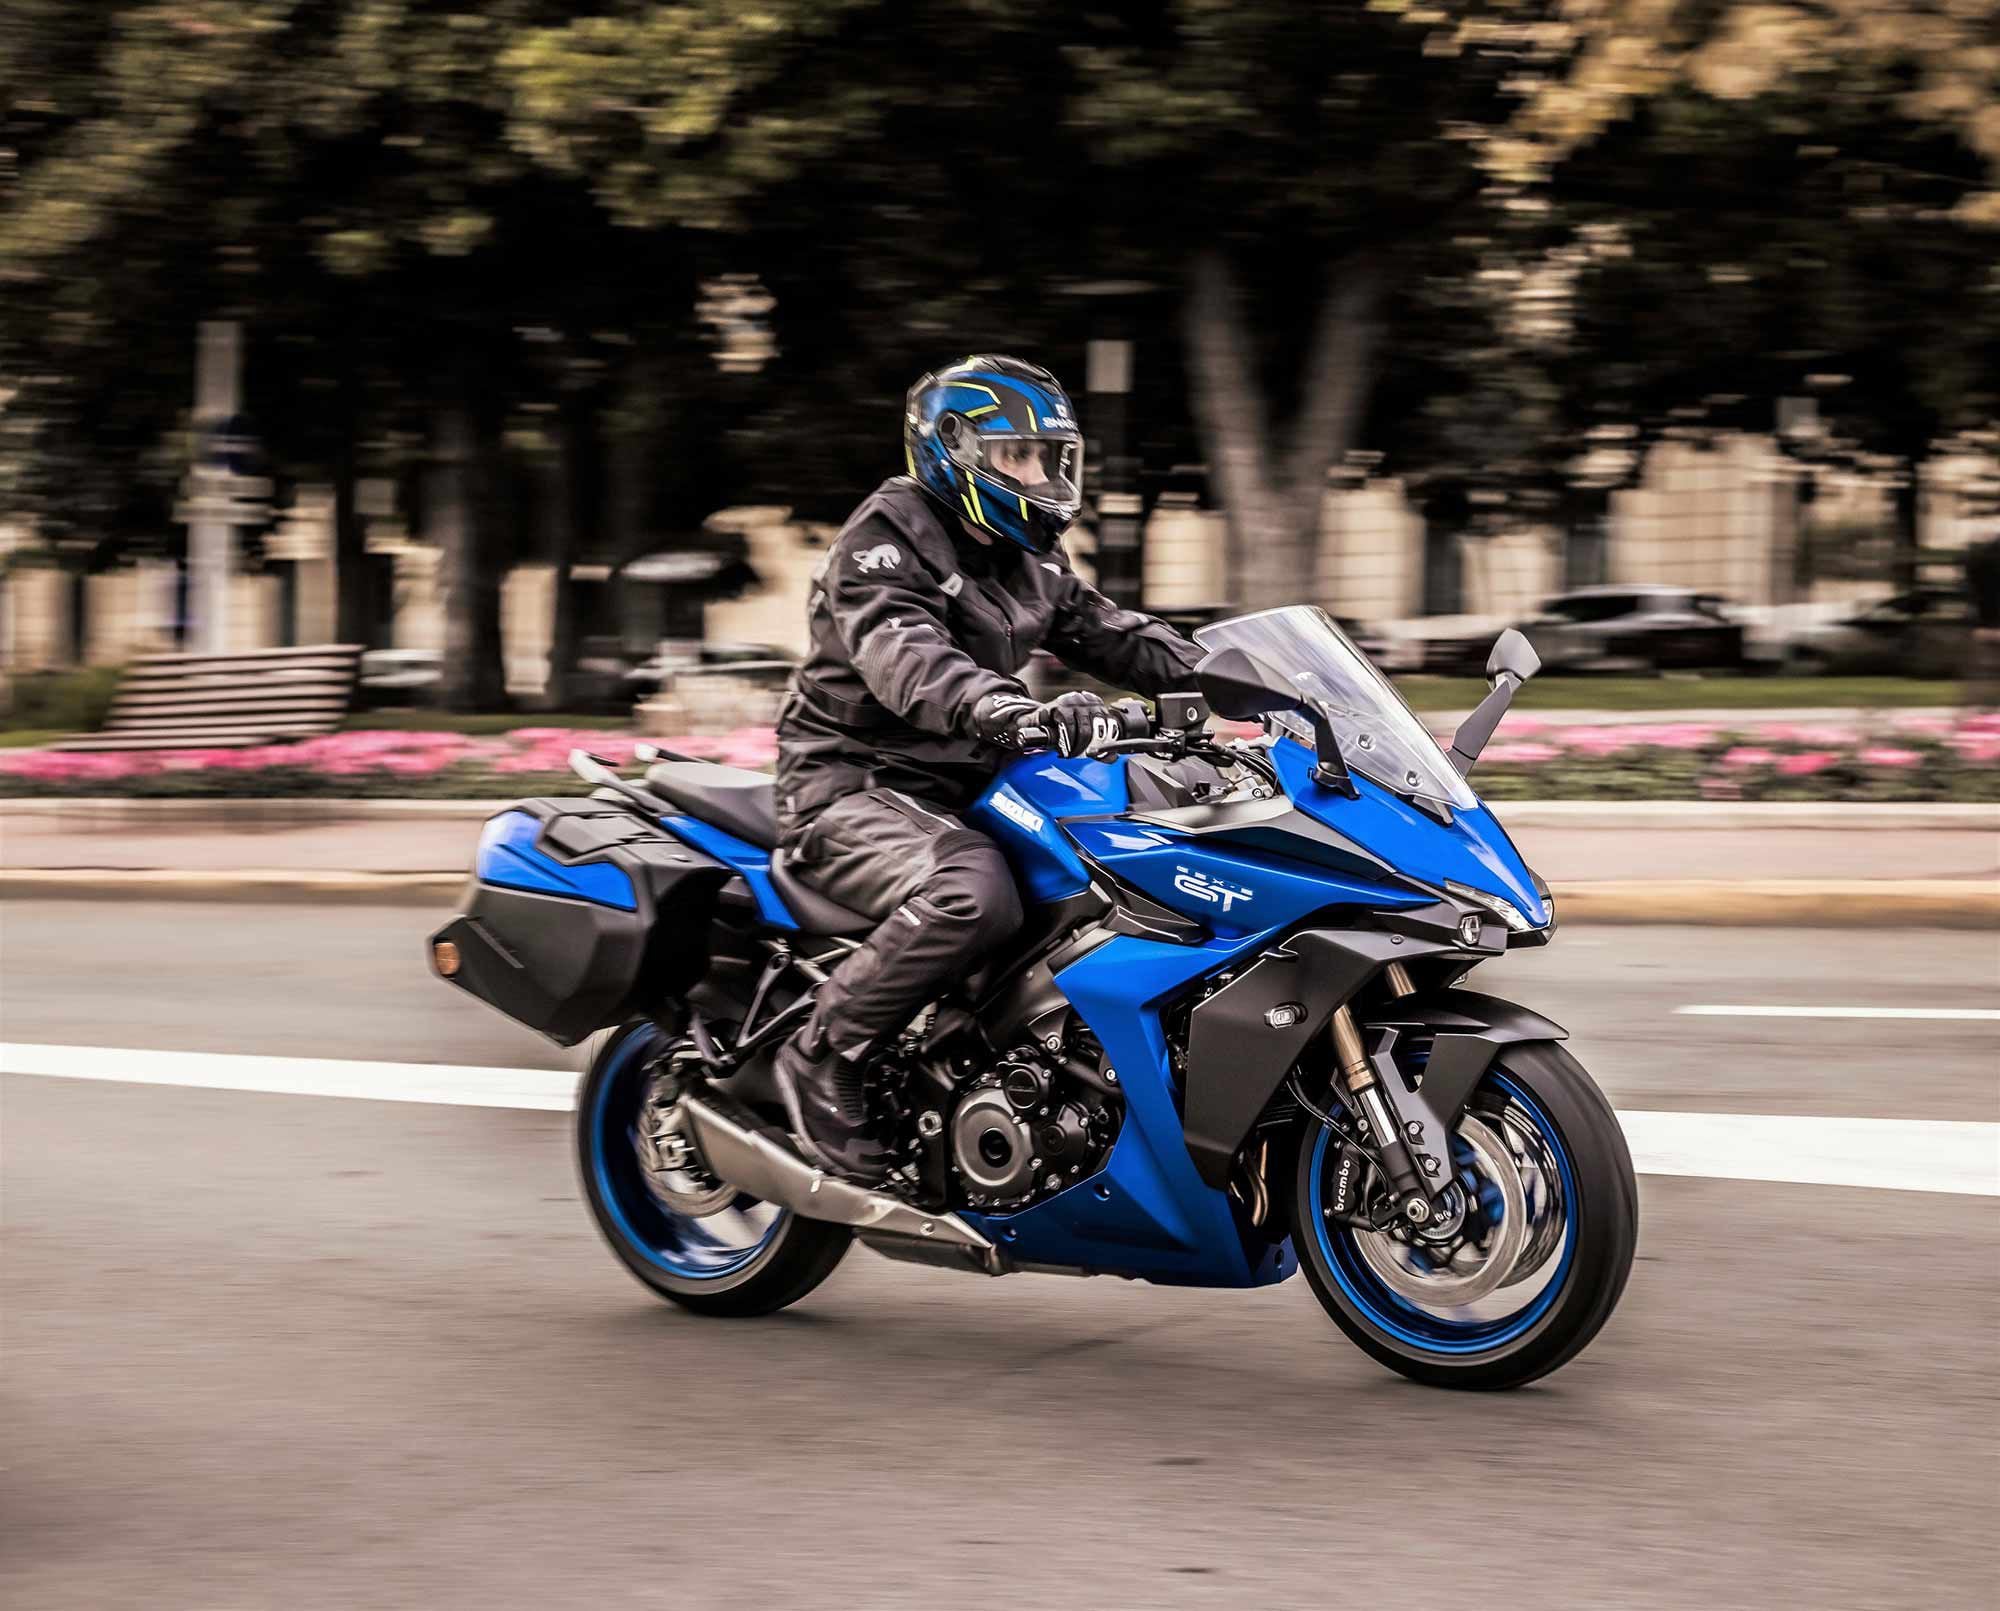 The GSX-S1000GT will be available in two colors: Metallic Reflective Blue (shown)…